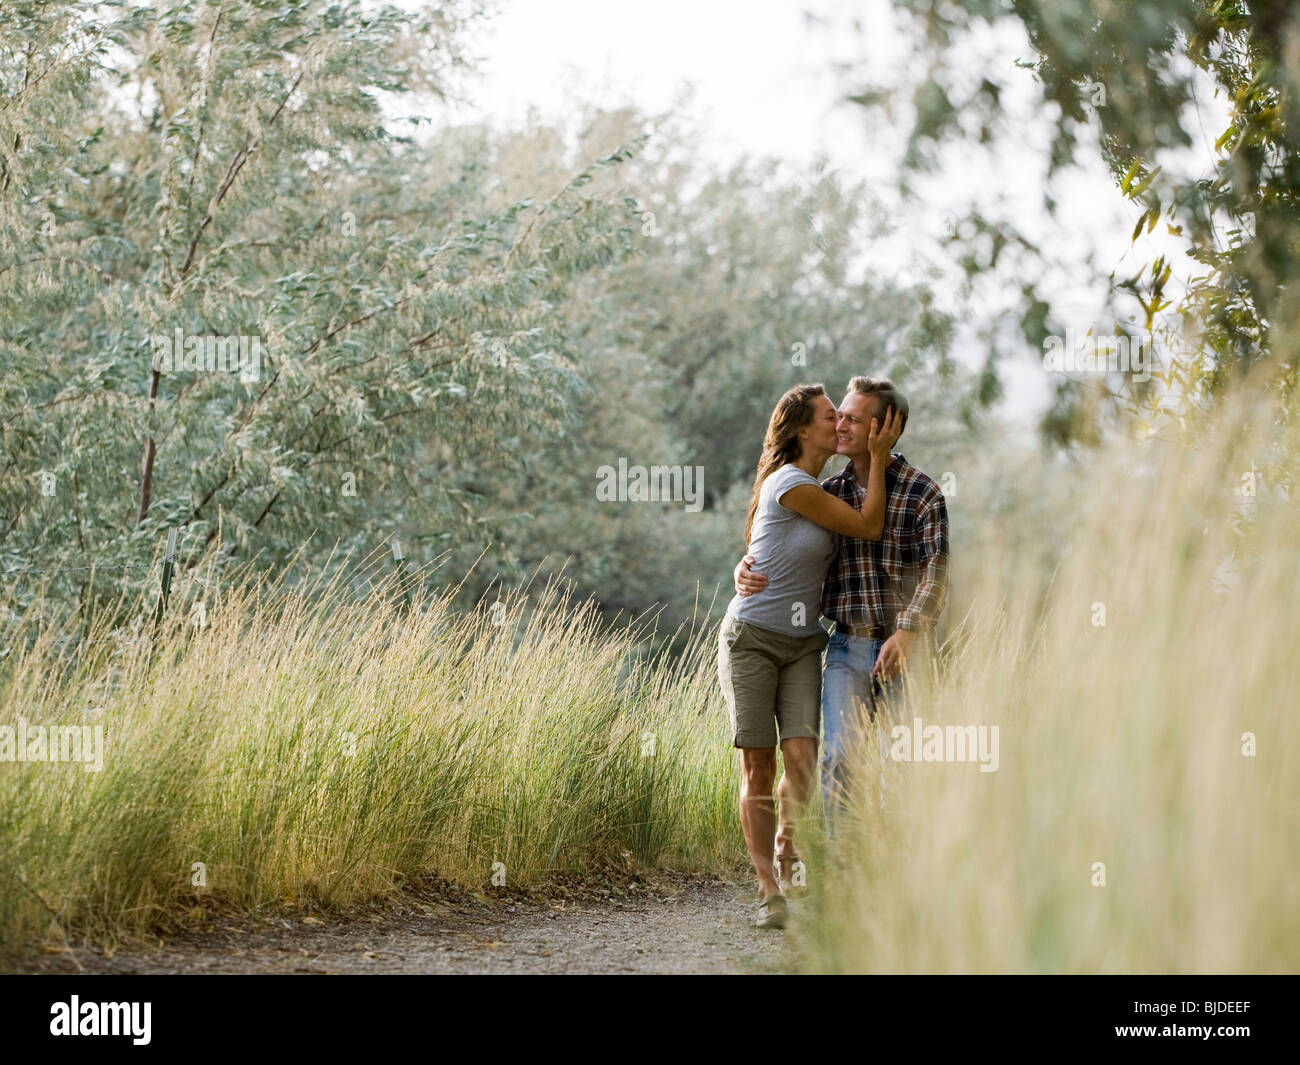 Two people on a nature walk. Stock Photo